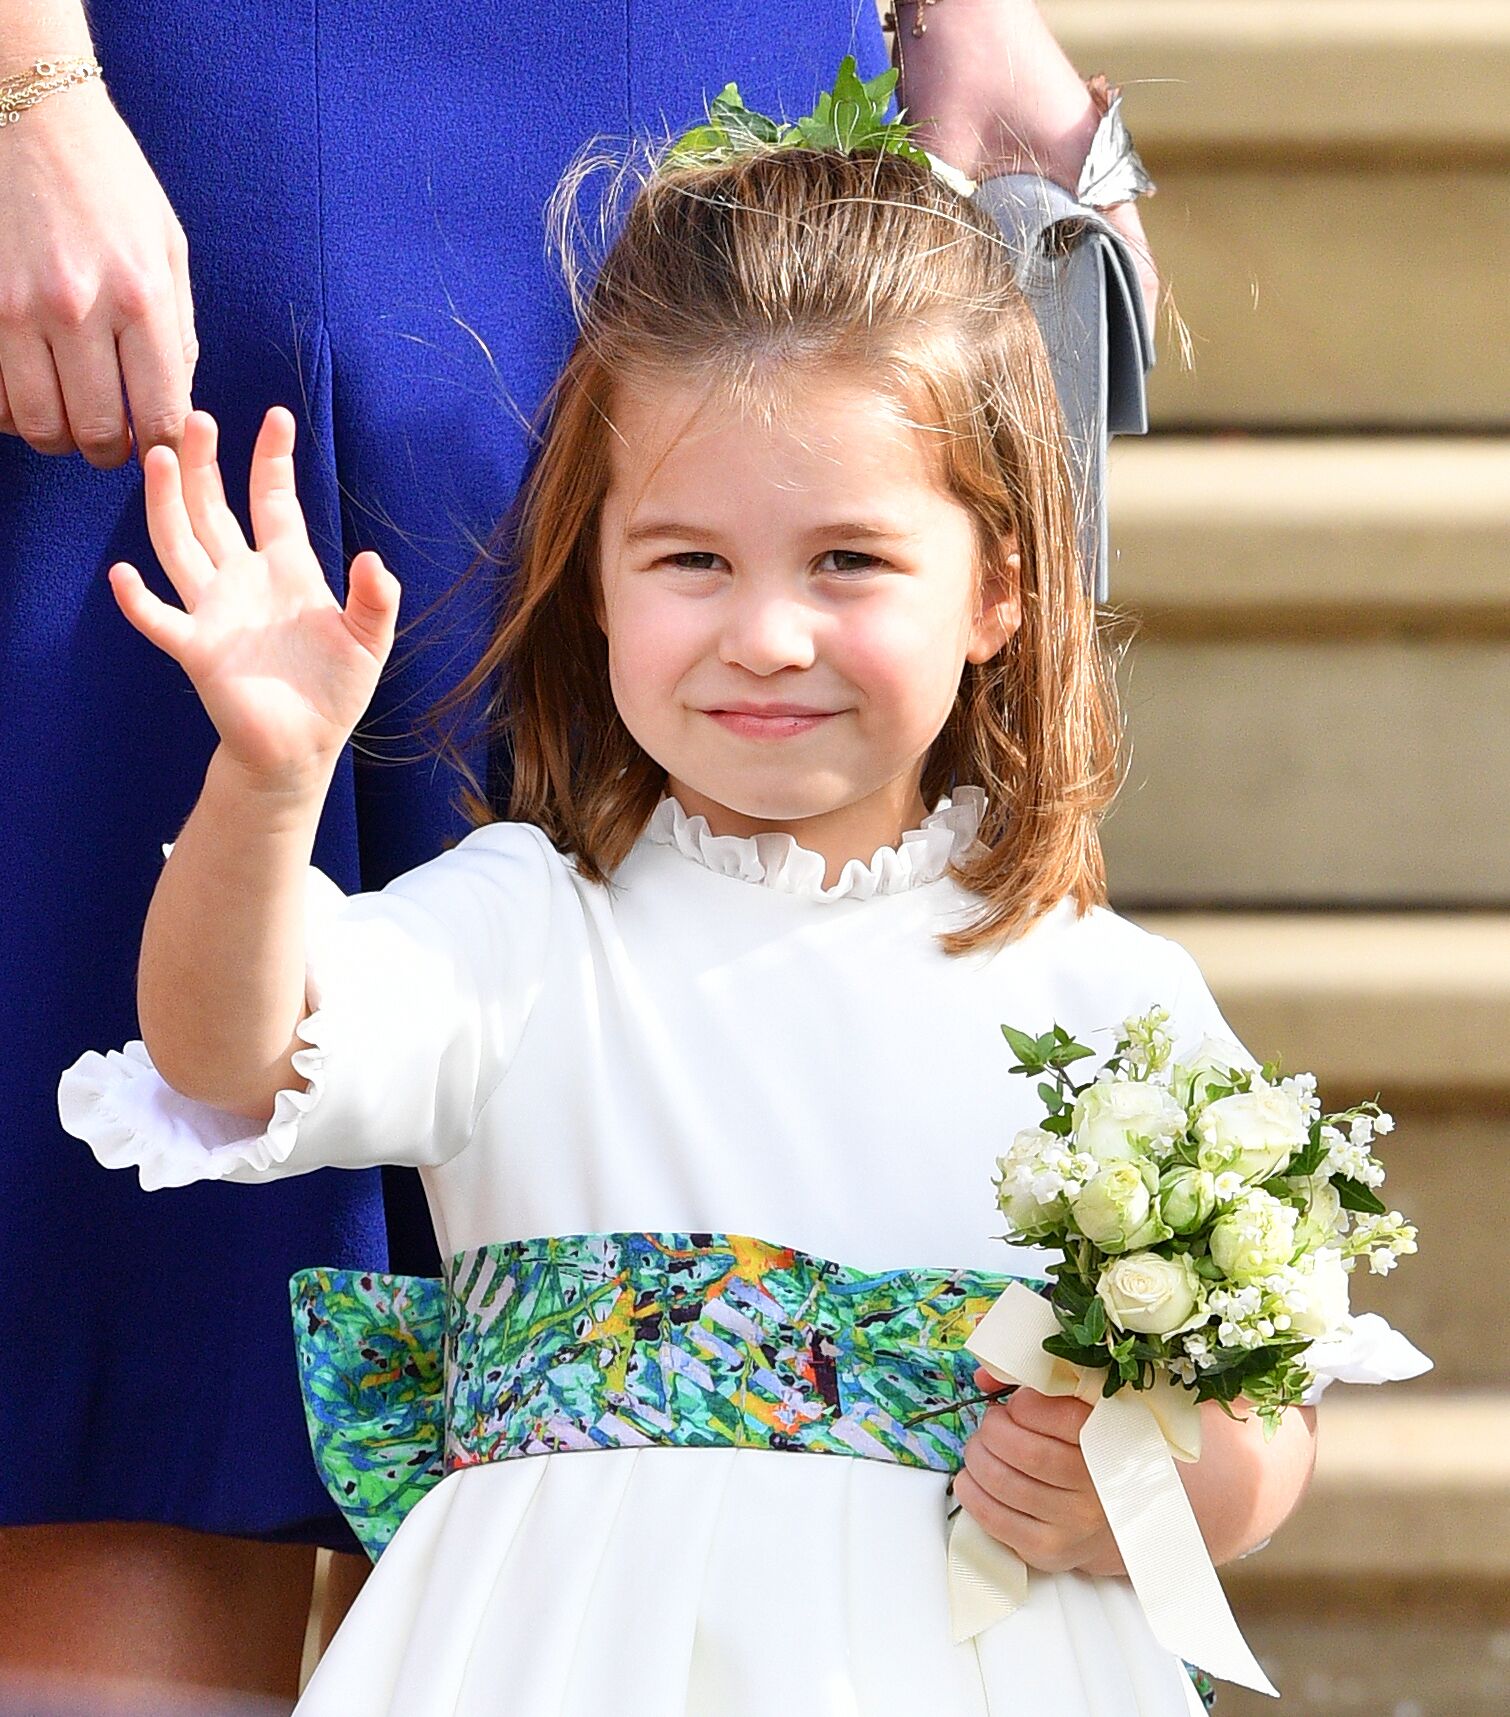 Princess Charlotte of Cambridge attends the wedding of Princess Eugenie of York and Jack Brooksbank at St George's Chapel on October 12, 2018 in Windsor, England. | Photo: Getty Images 